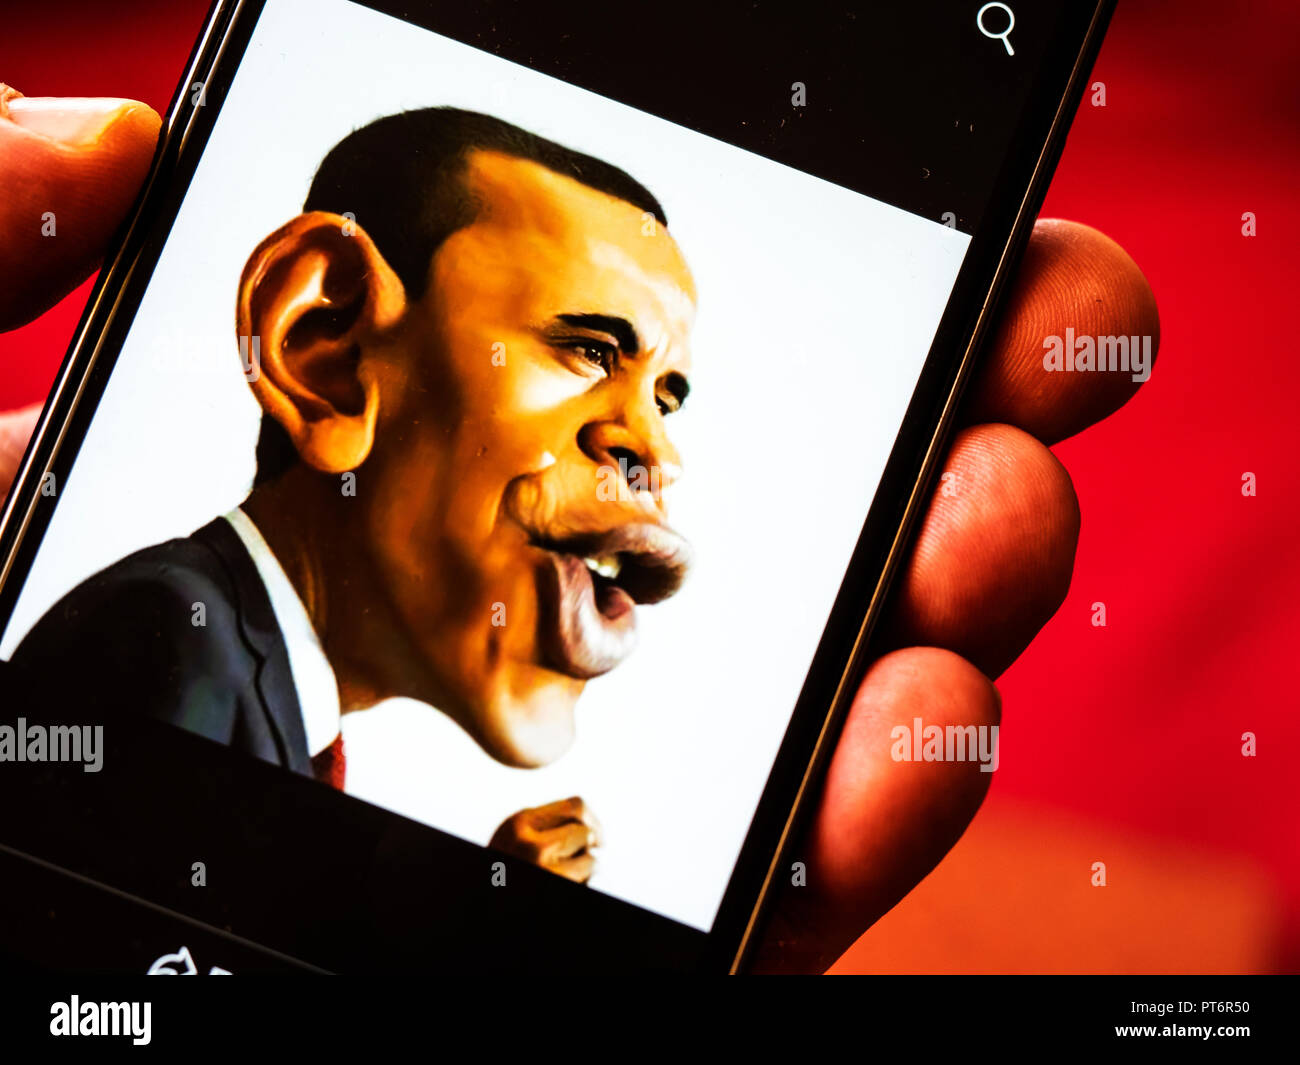 Funny Portrait of President Barack Obama on Facebook account seen displayed  on a smart phone Stock Photo - Alamy